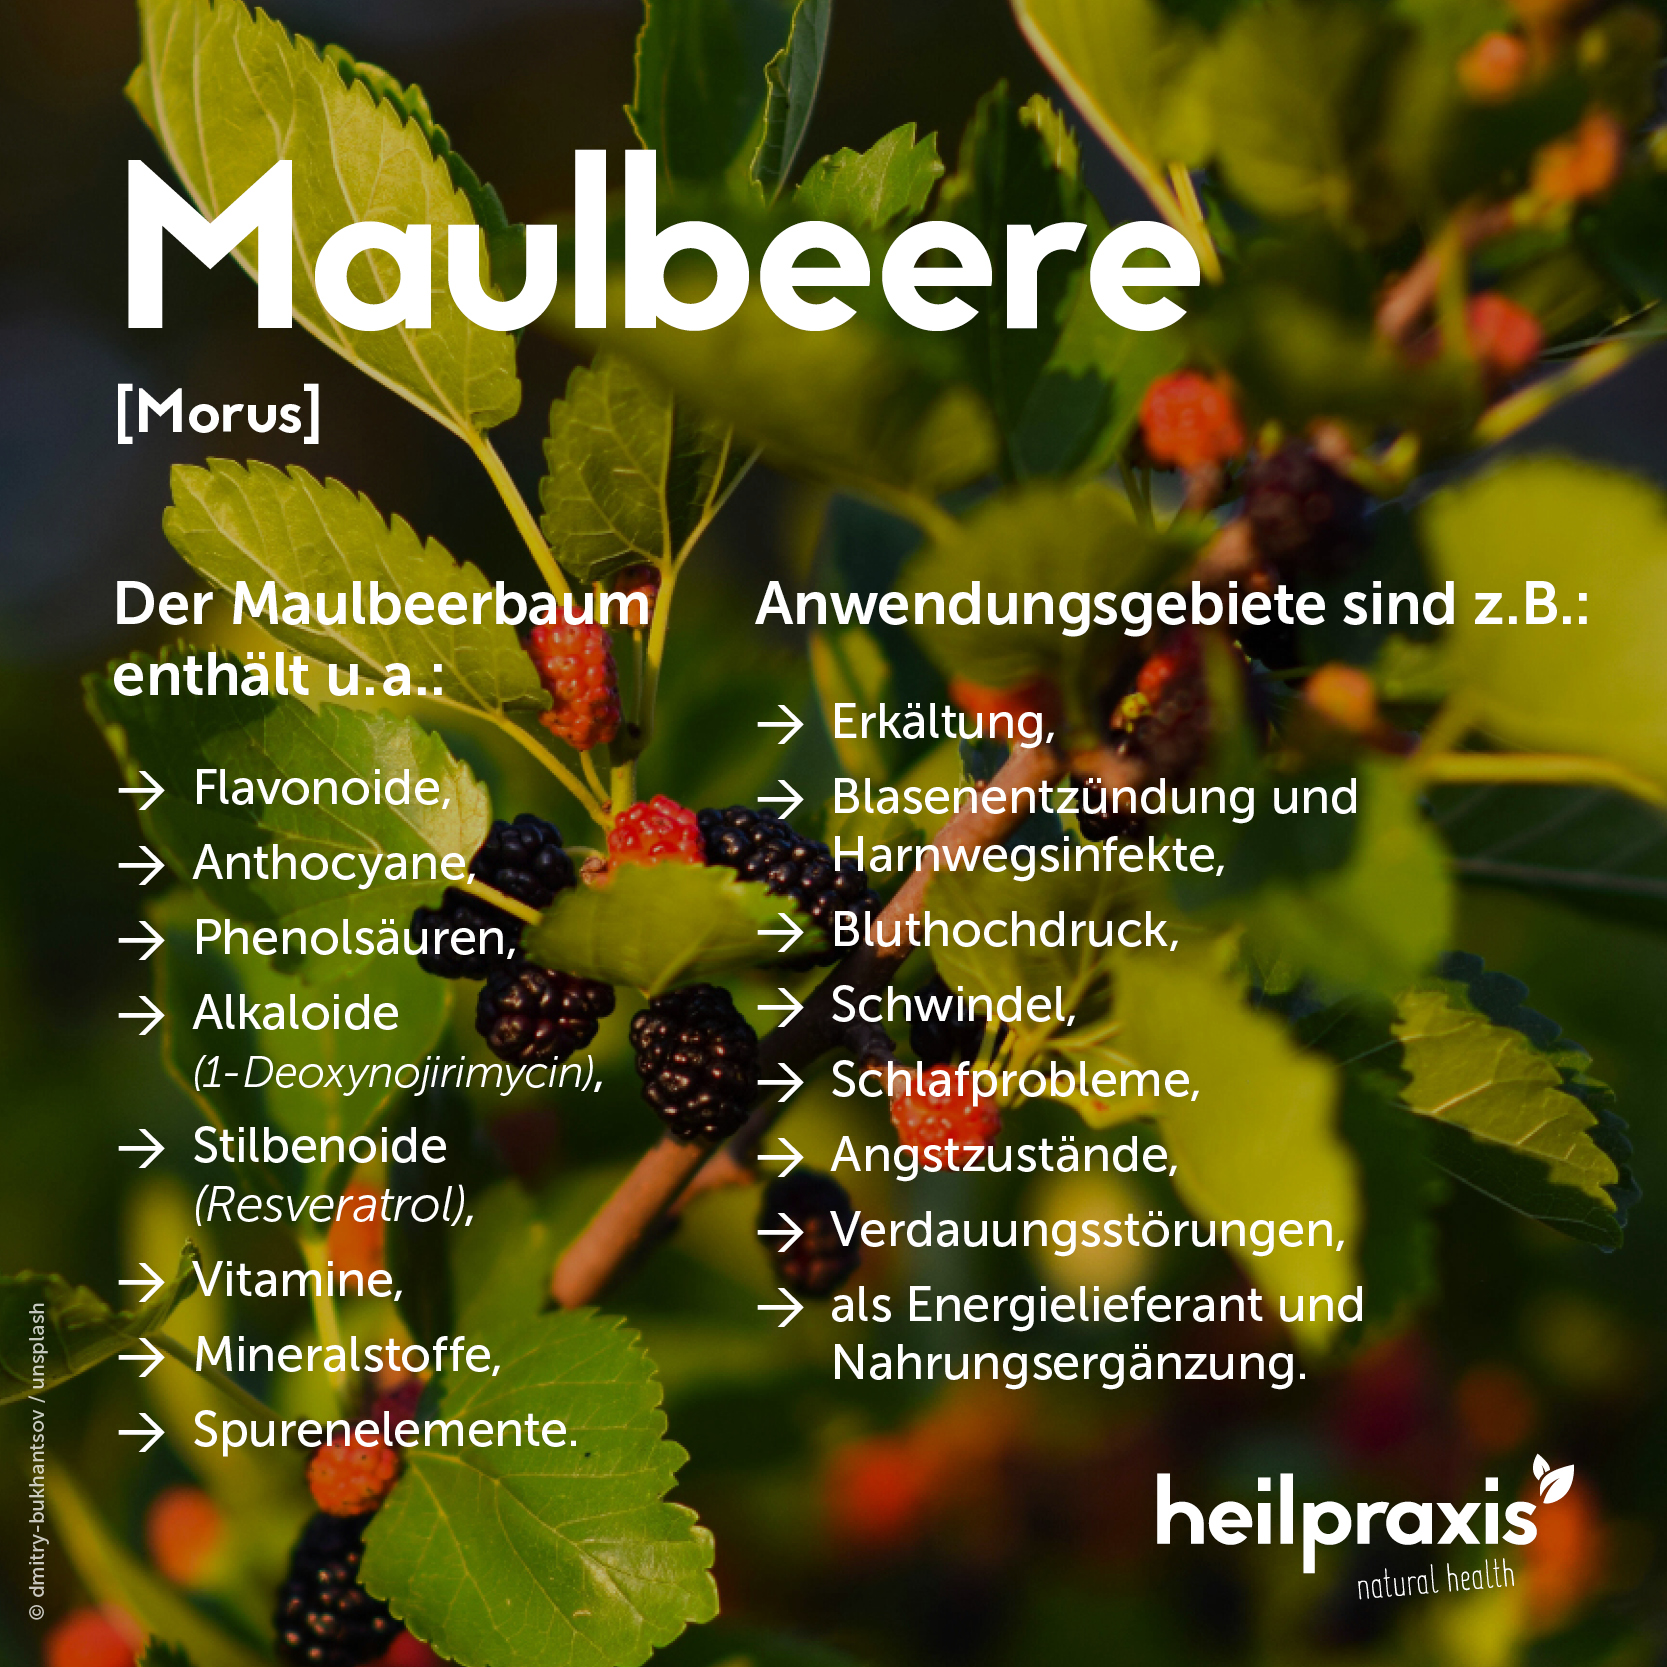 Overview graphic of the ingredients and application of the mulberry tree